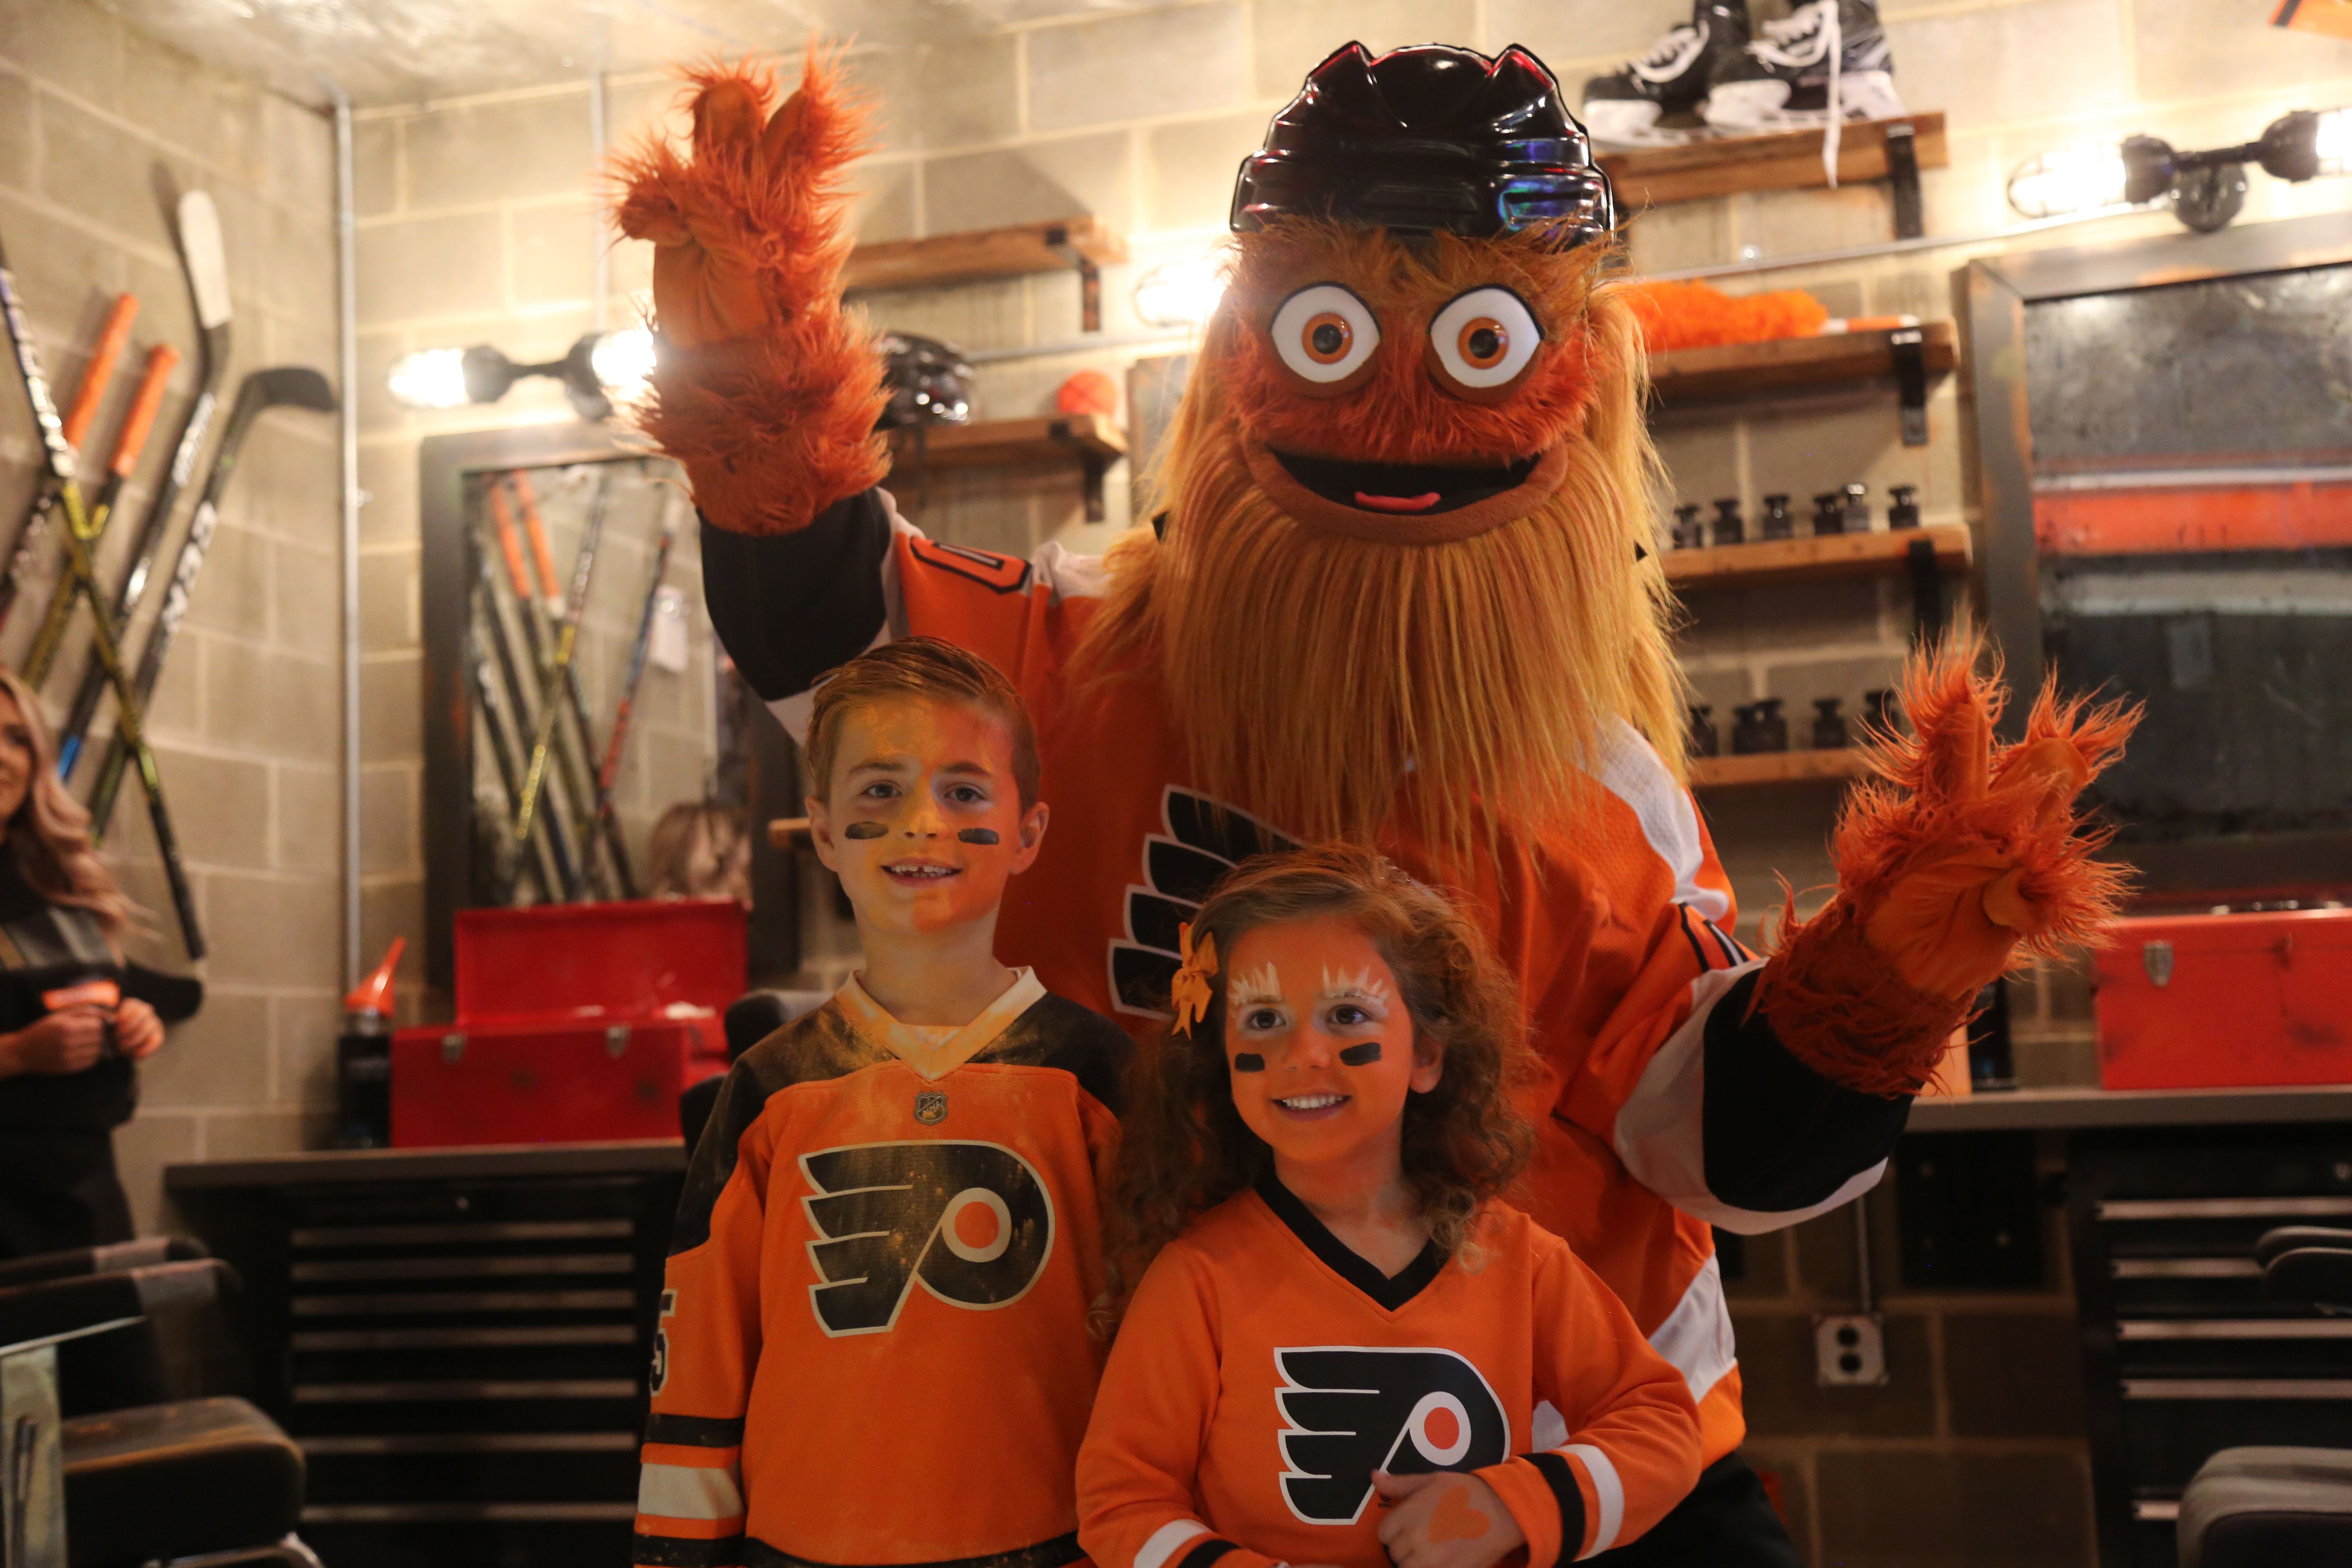 Gritty's City Hall appearance has been scheduled